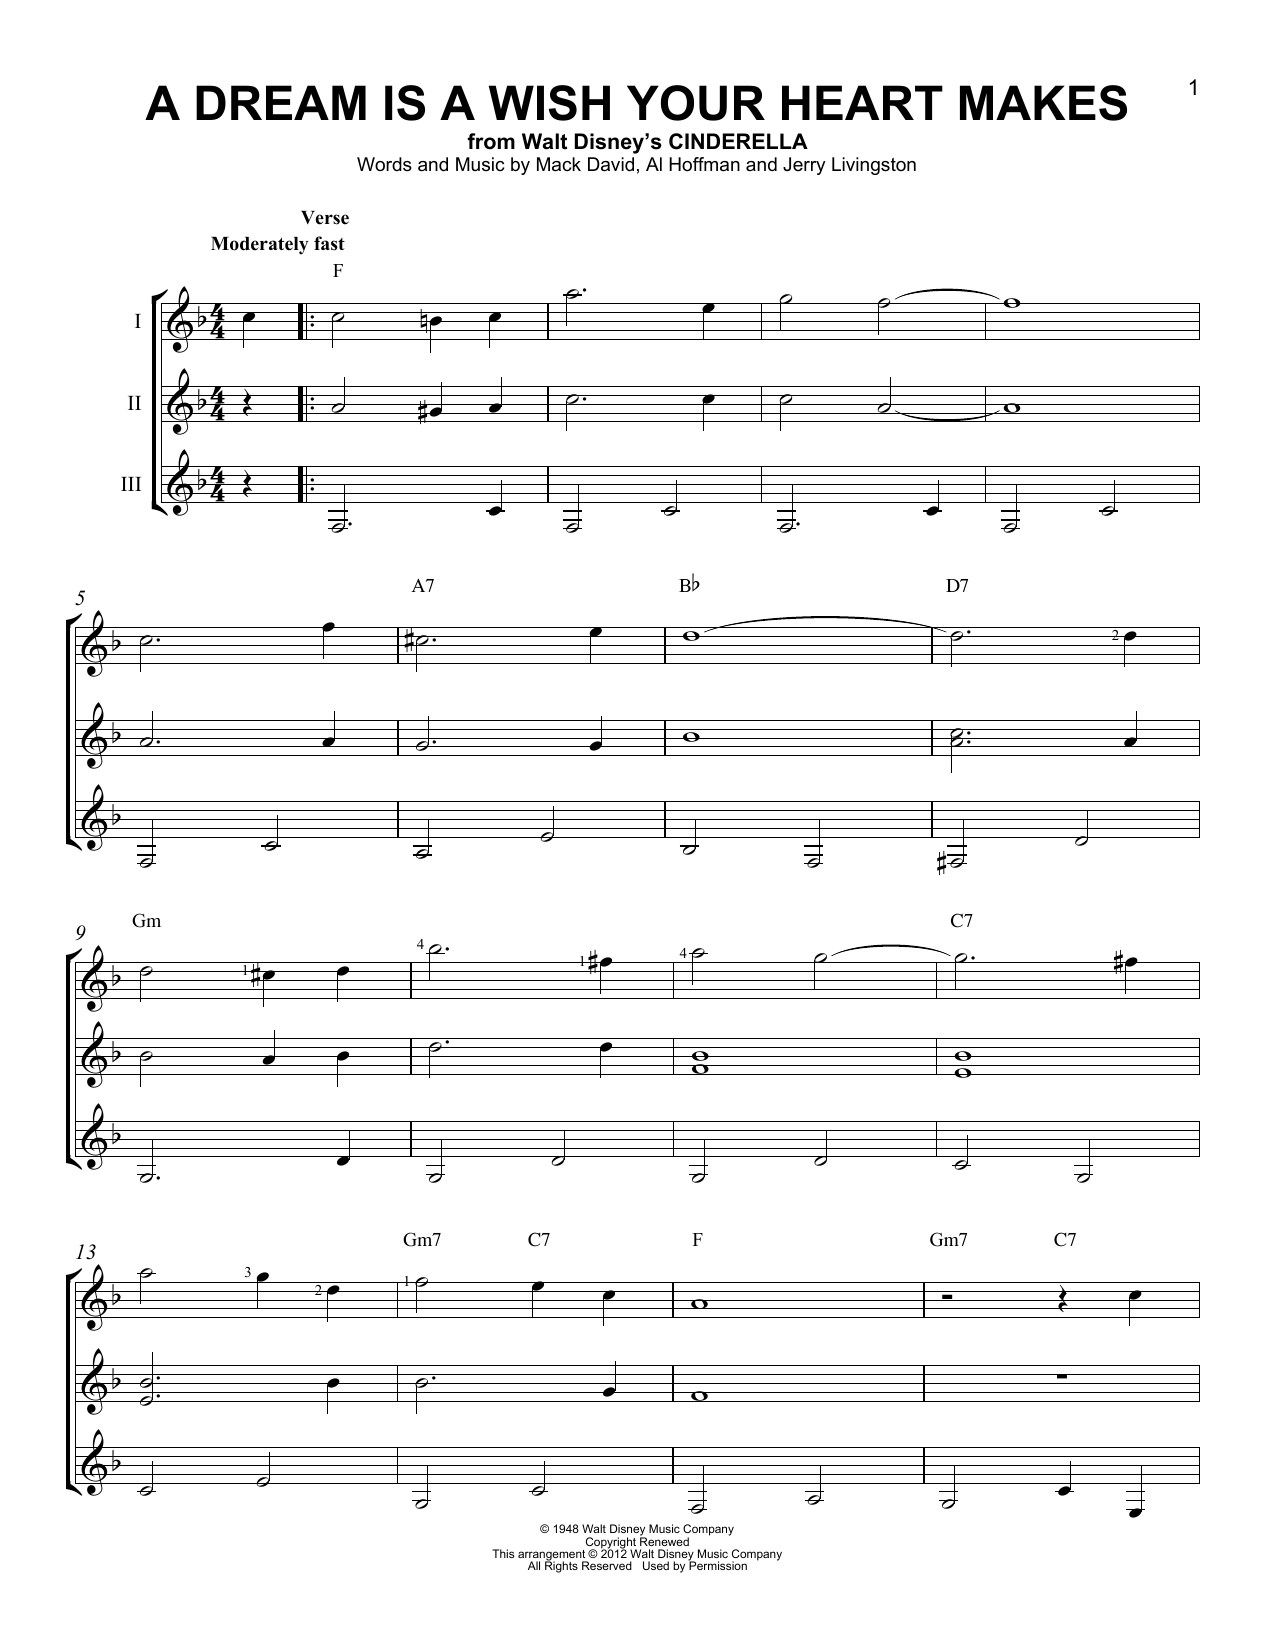 Download Mack David, Al Hoffman and Jerry Liv A Dream Is A Wish Your Heart Makes Sheet Music